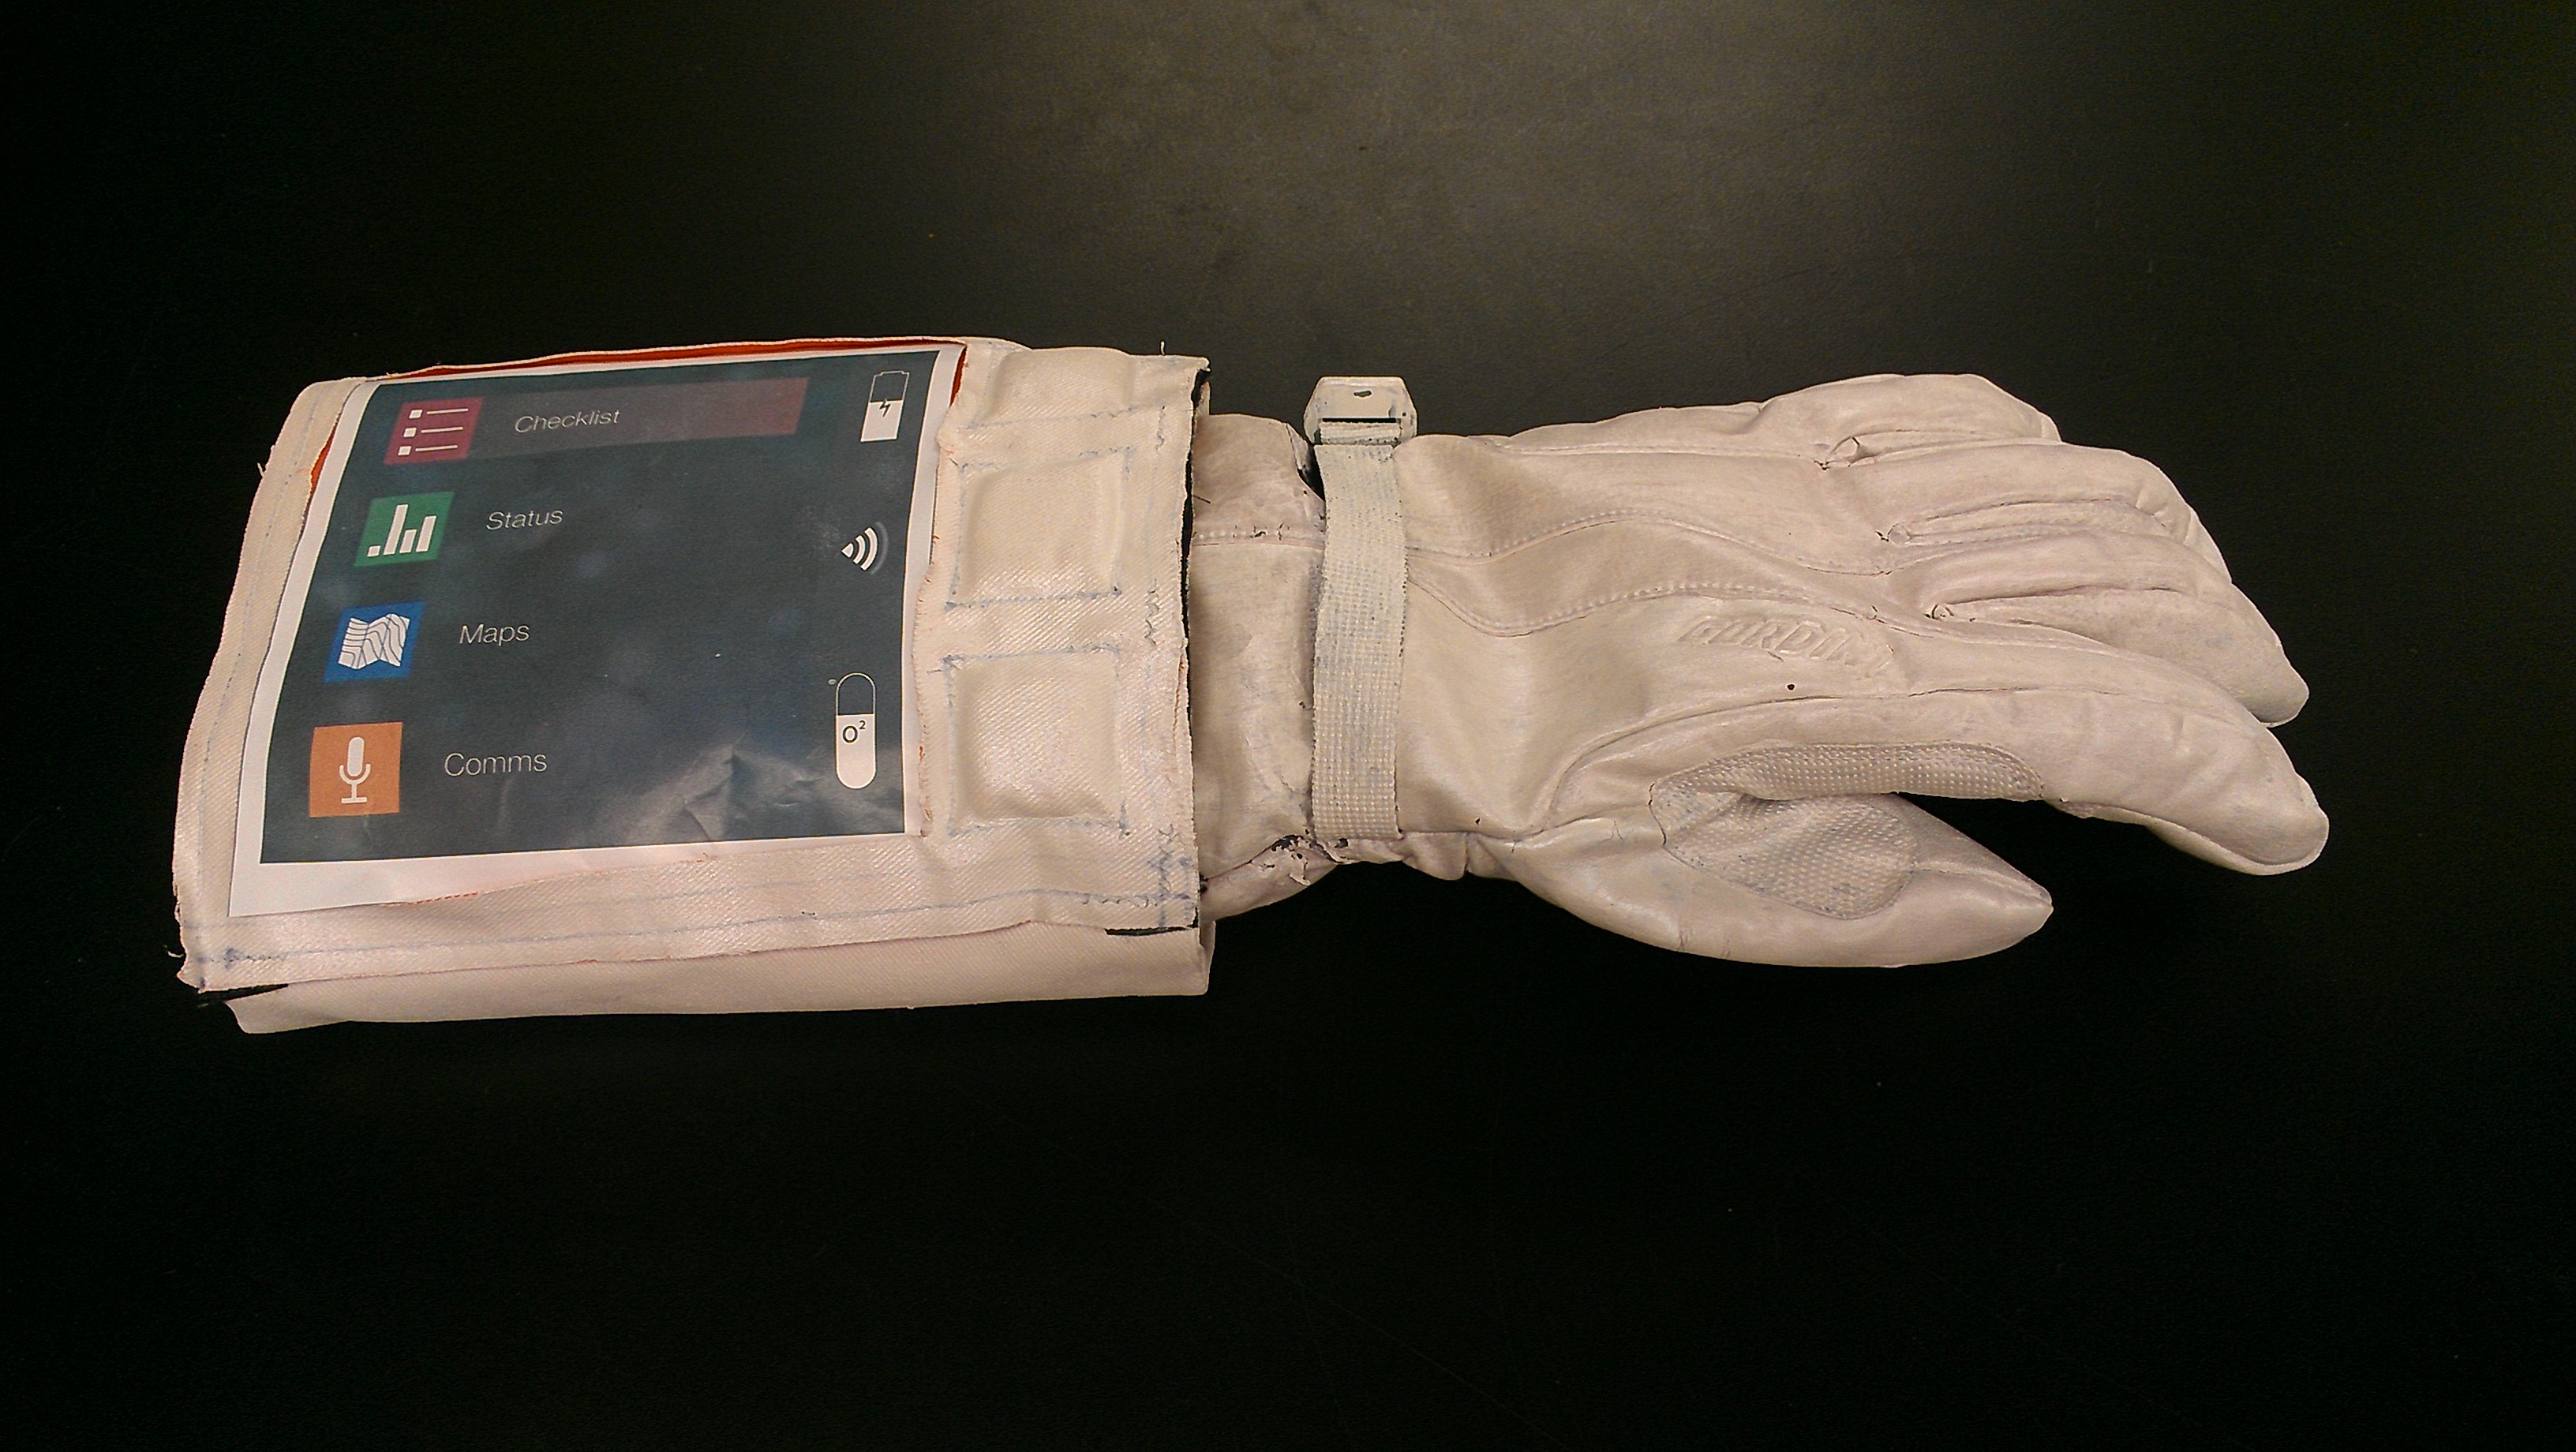 Tom Martin - Prototype cuff checklist with soft fabric switches for space suit (2014)